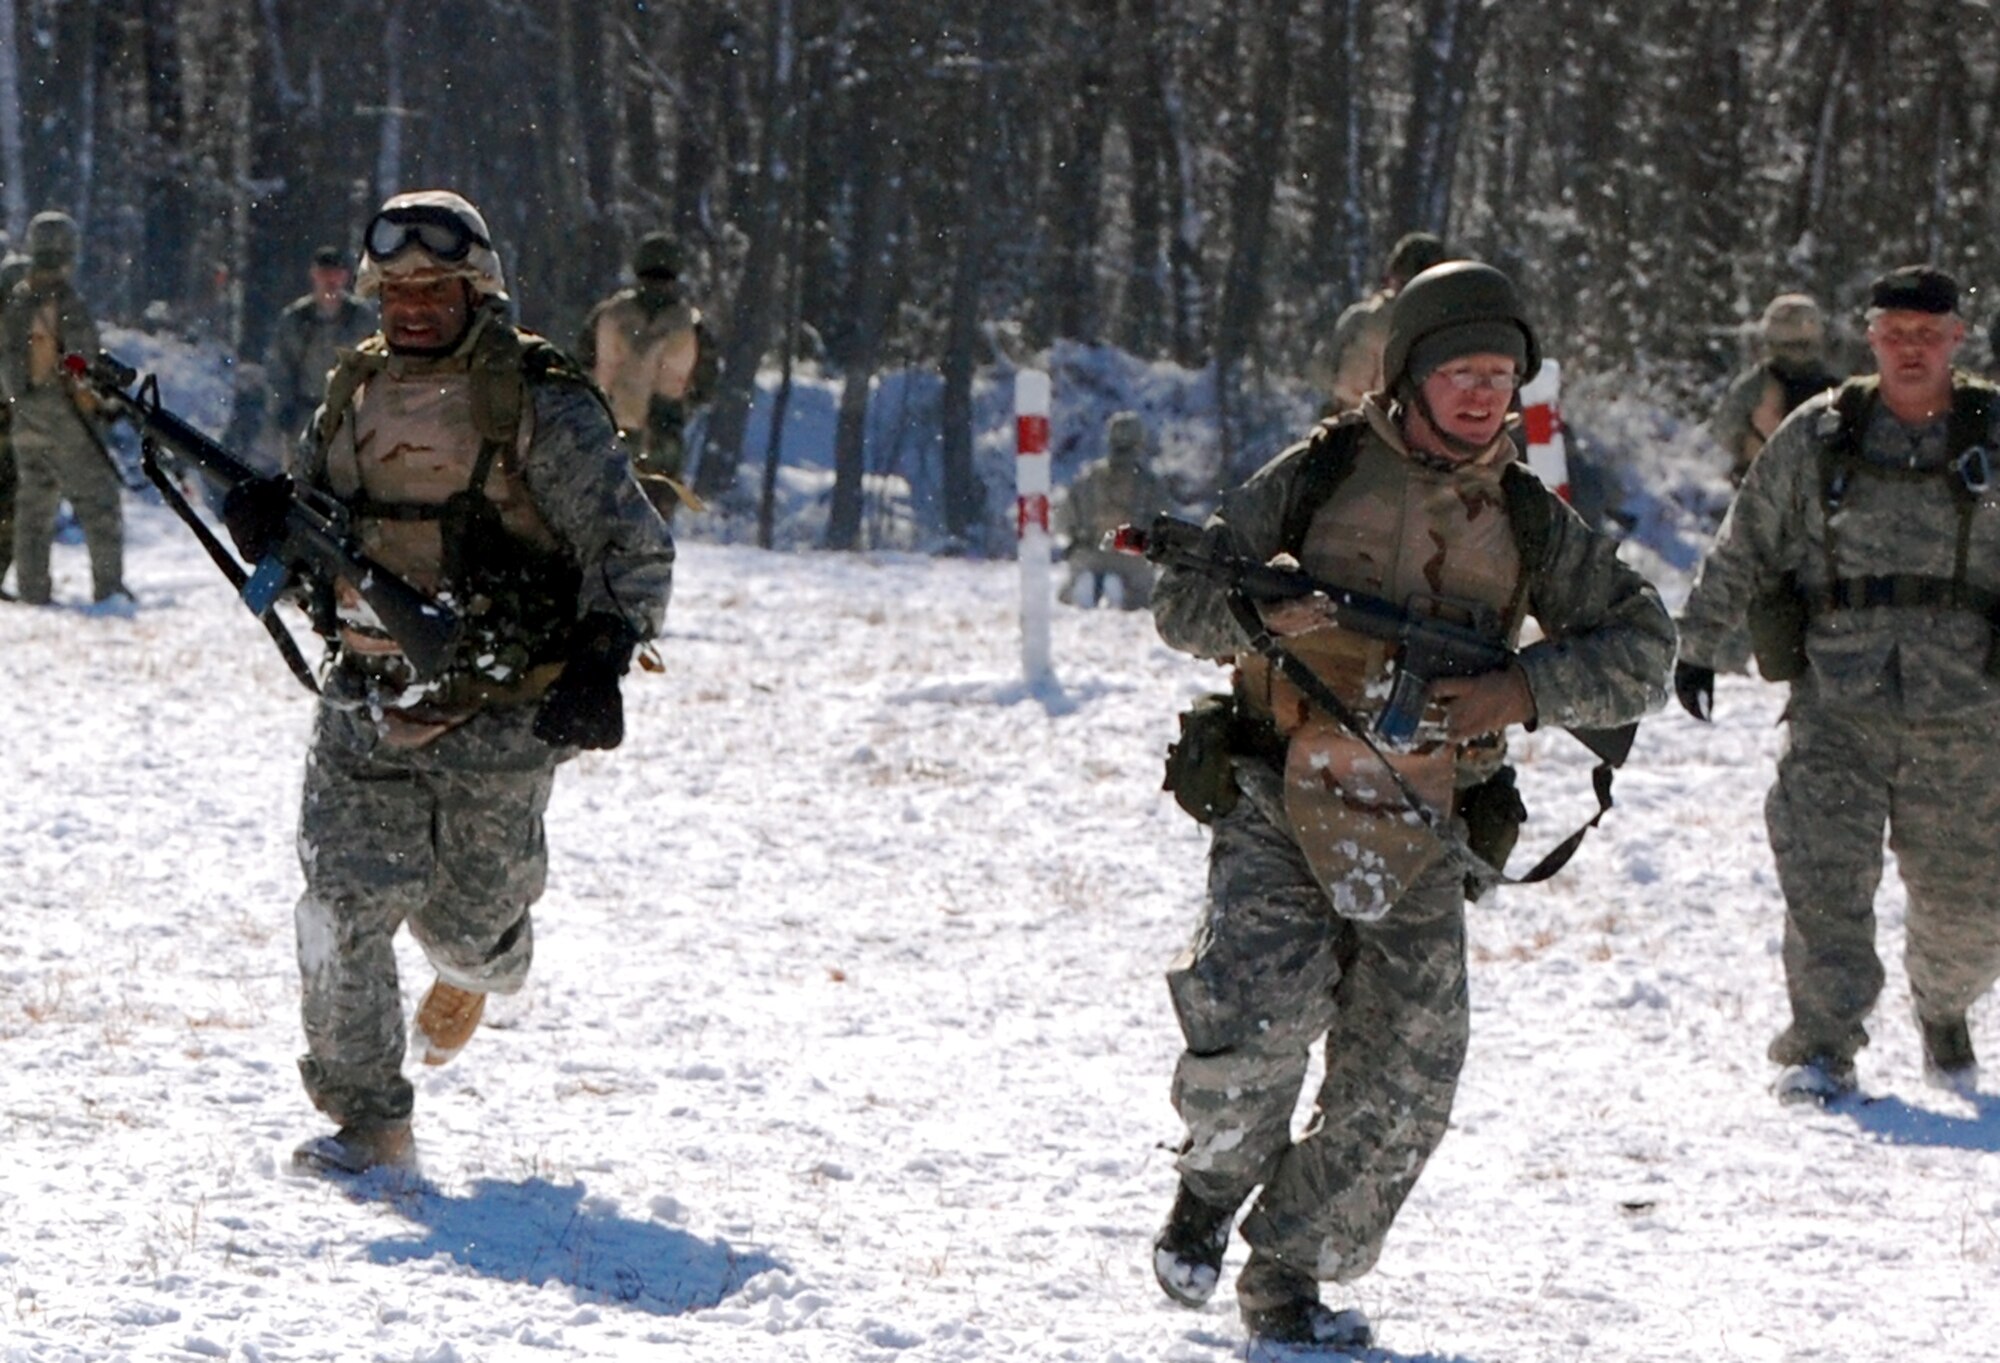 Airmen in the Advanced Contingency Skills Training Course practice a patrolling and tactics response Feb. 4, 2008, during training on a Fort Dix, N.J., range.  The course, taught by the U.S. Air Force Expeditionary Center's 421st Combat Training Squadron, prepares Airmen for upcoming deployments to areas such as Iraq and Afghanistan.  The students learn advanced combat skills in convoy operations, military operations in urban terrain and related training.  (U.S. Air Force Photo/Tech. Sgt. Scott T. Sturkol)